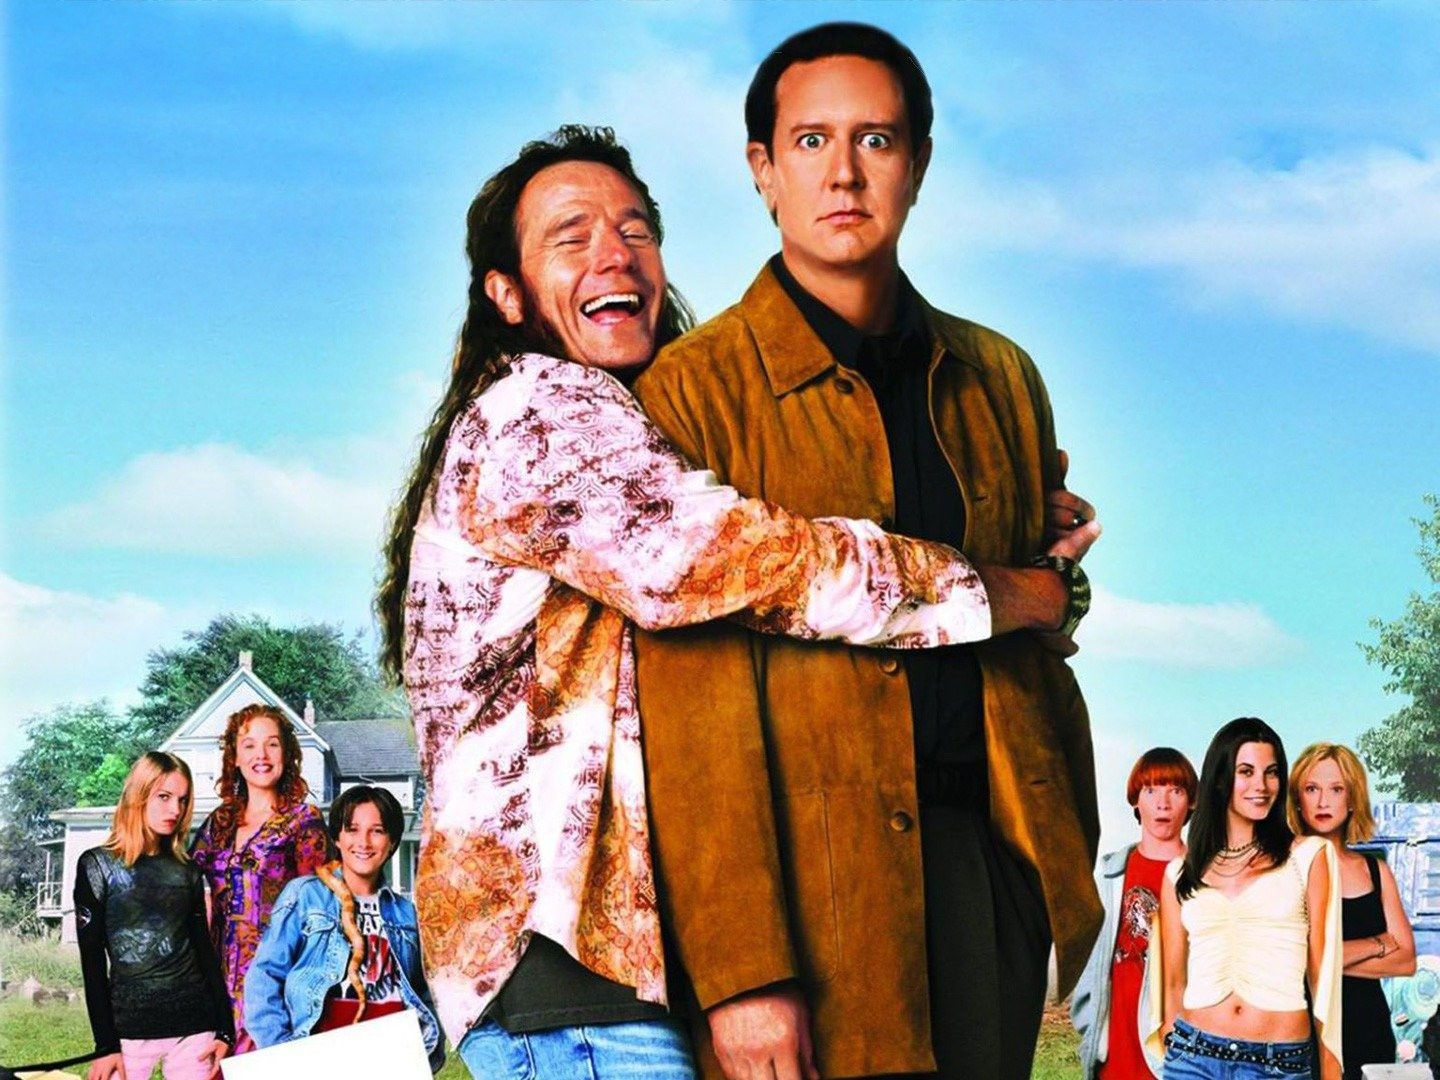 Pieces of April and National Lampoon's Thanksgiving Family Reunion movies  review: family affairs 